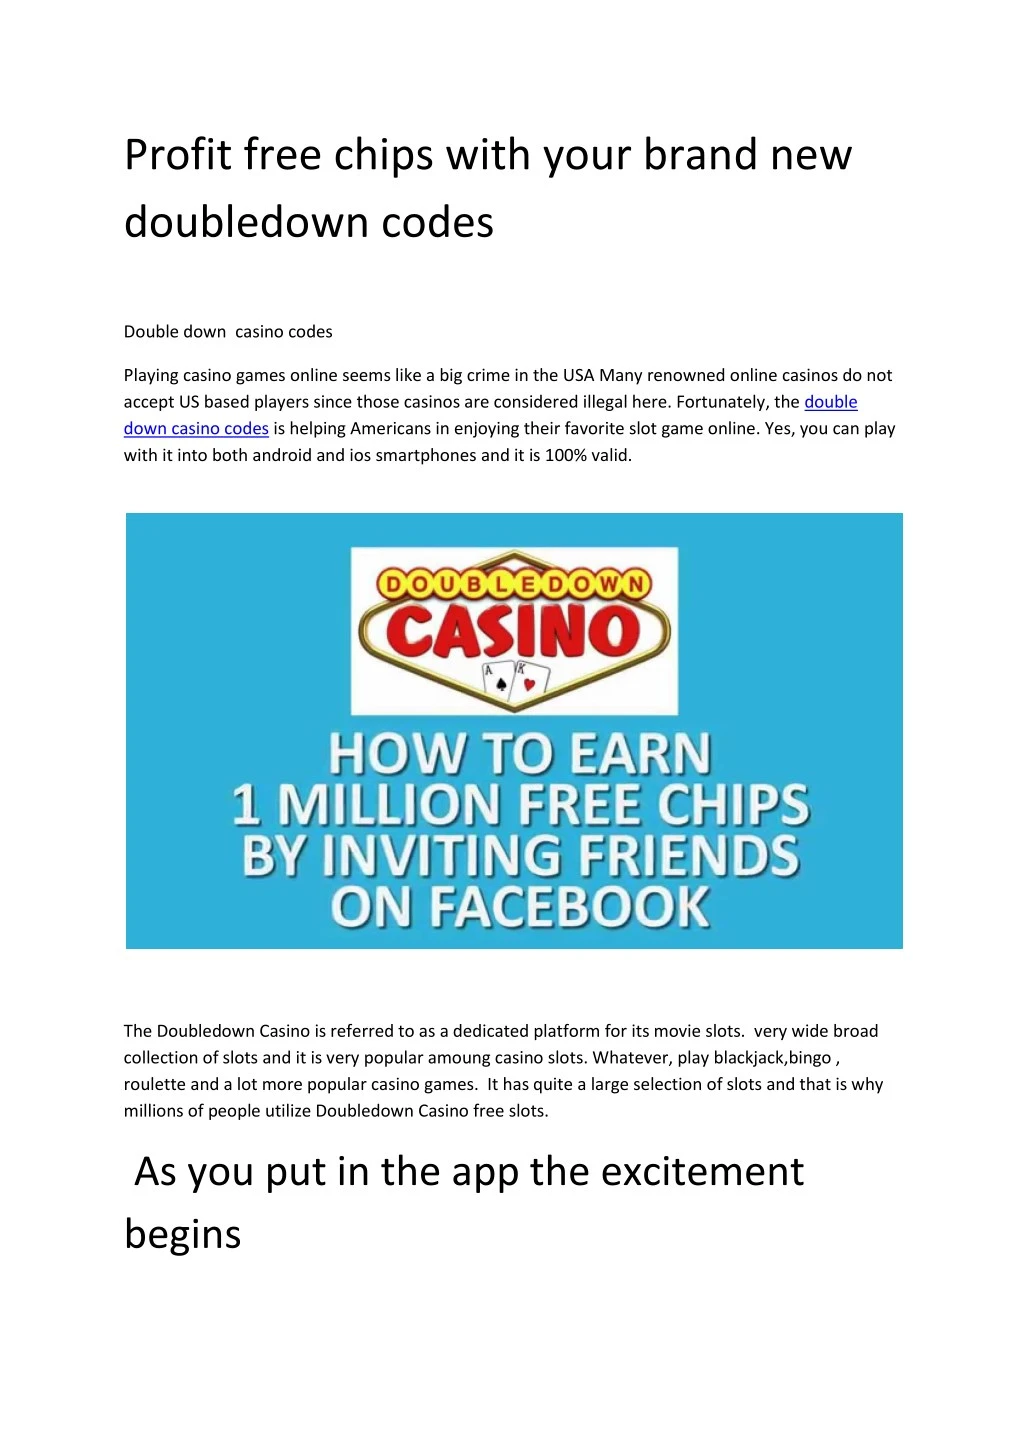 profit free chips with your brand new doubledown